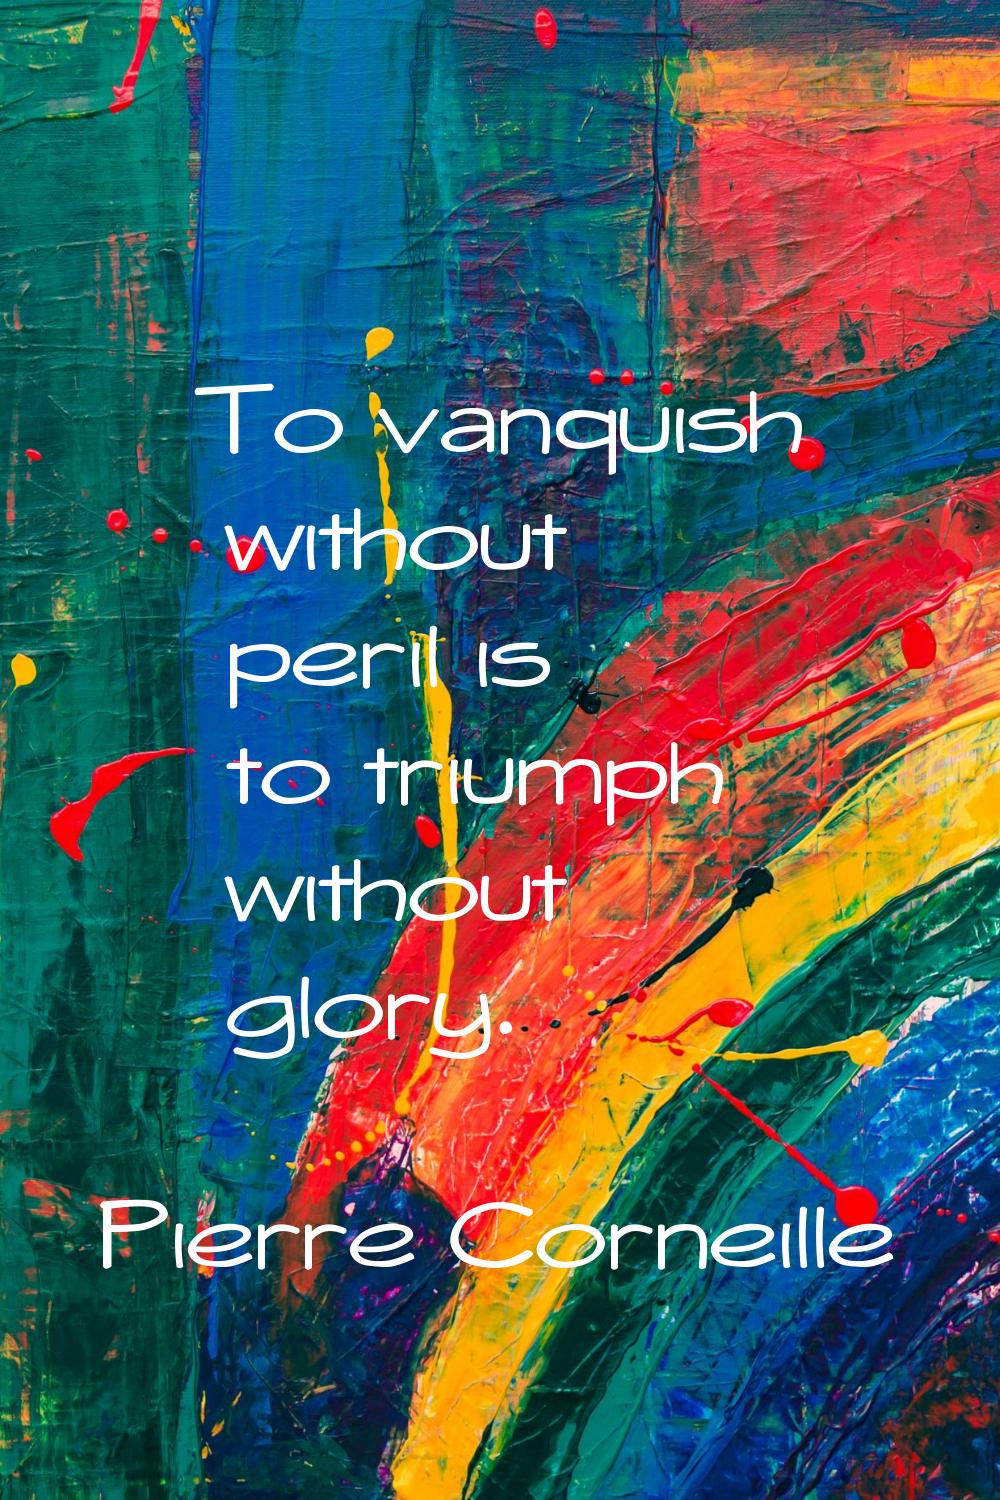 To vanquish without peril is to triumph without glory.